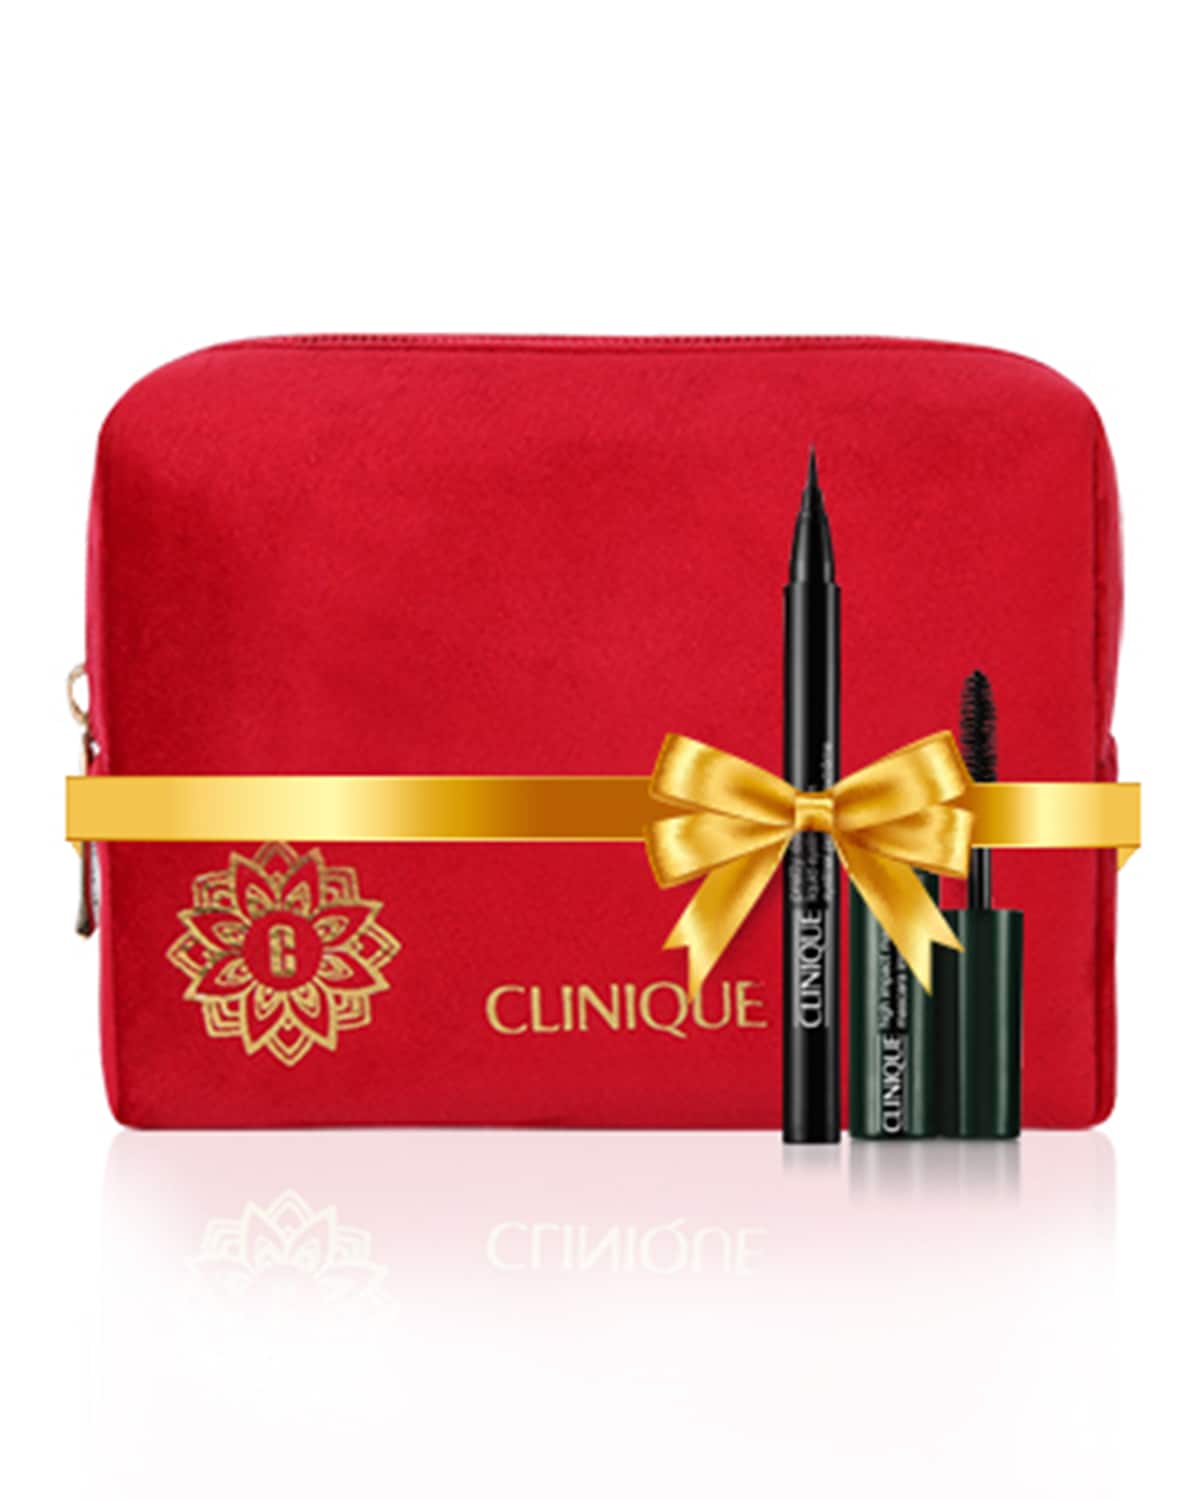 Clinique's Makeup Duo with pouch